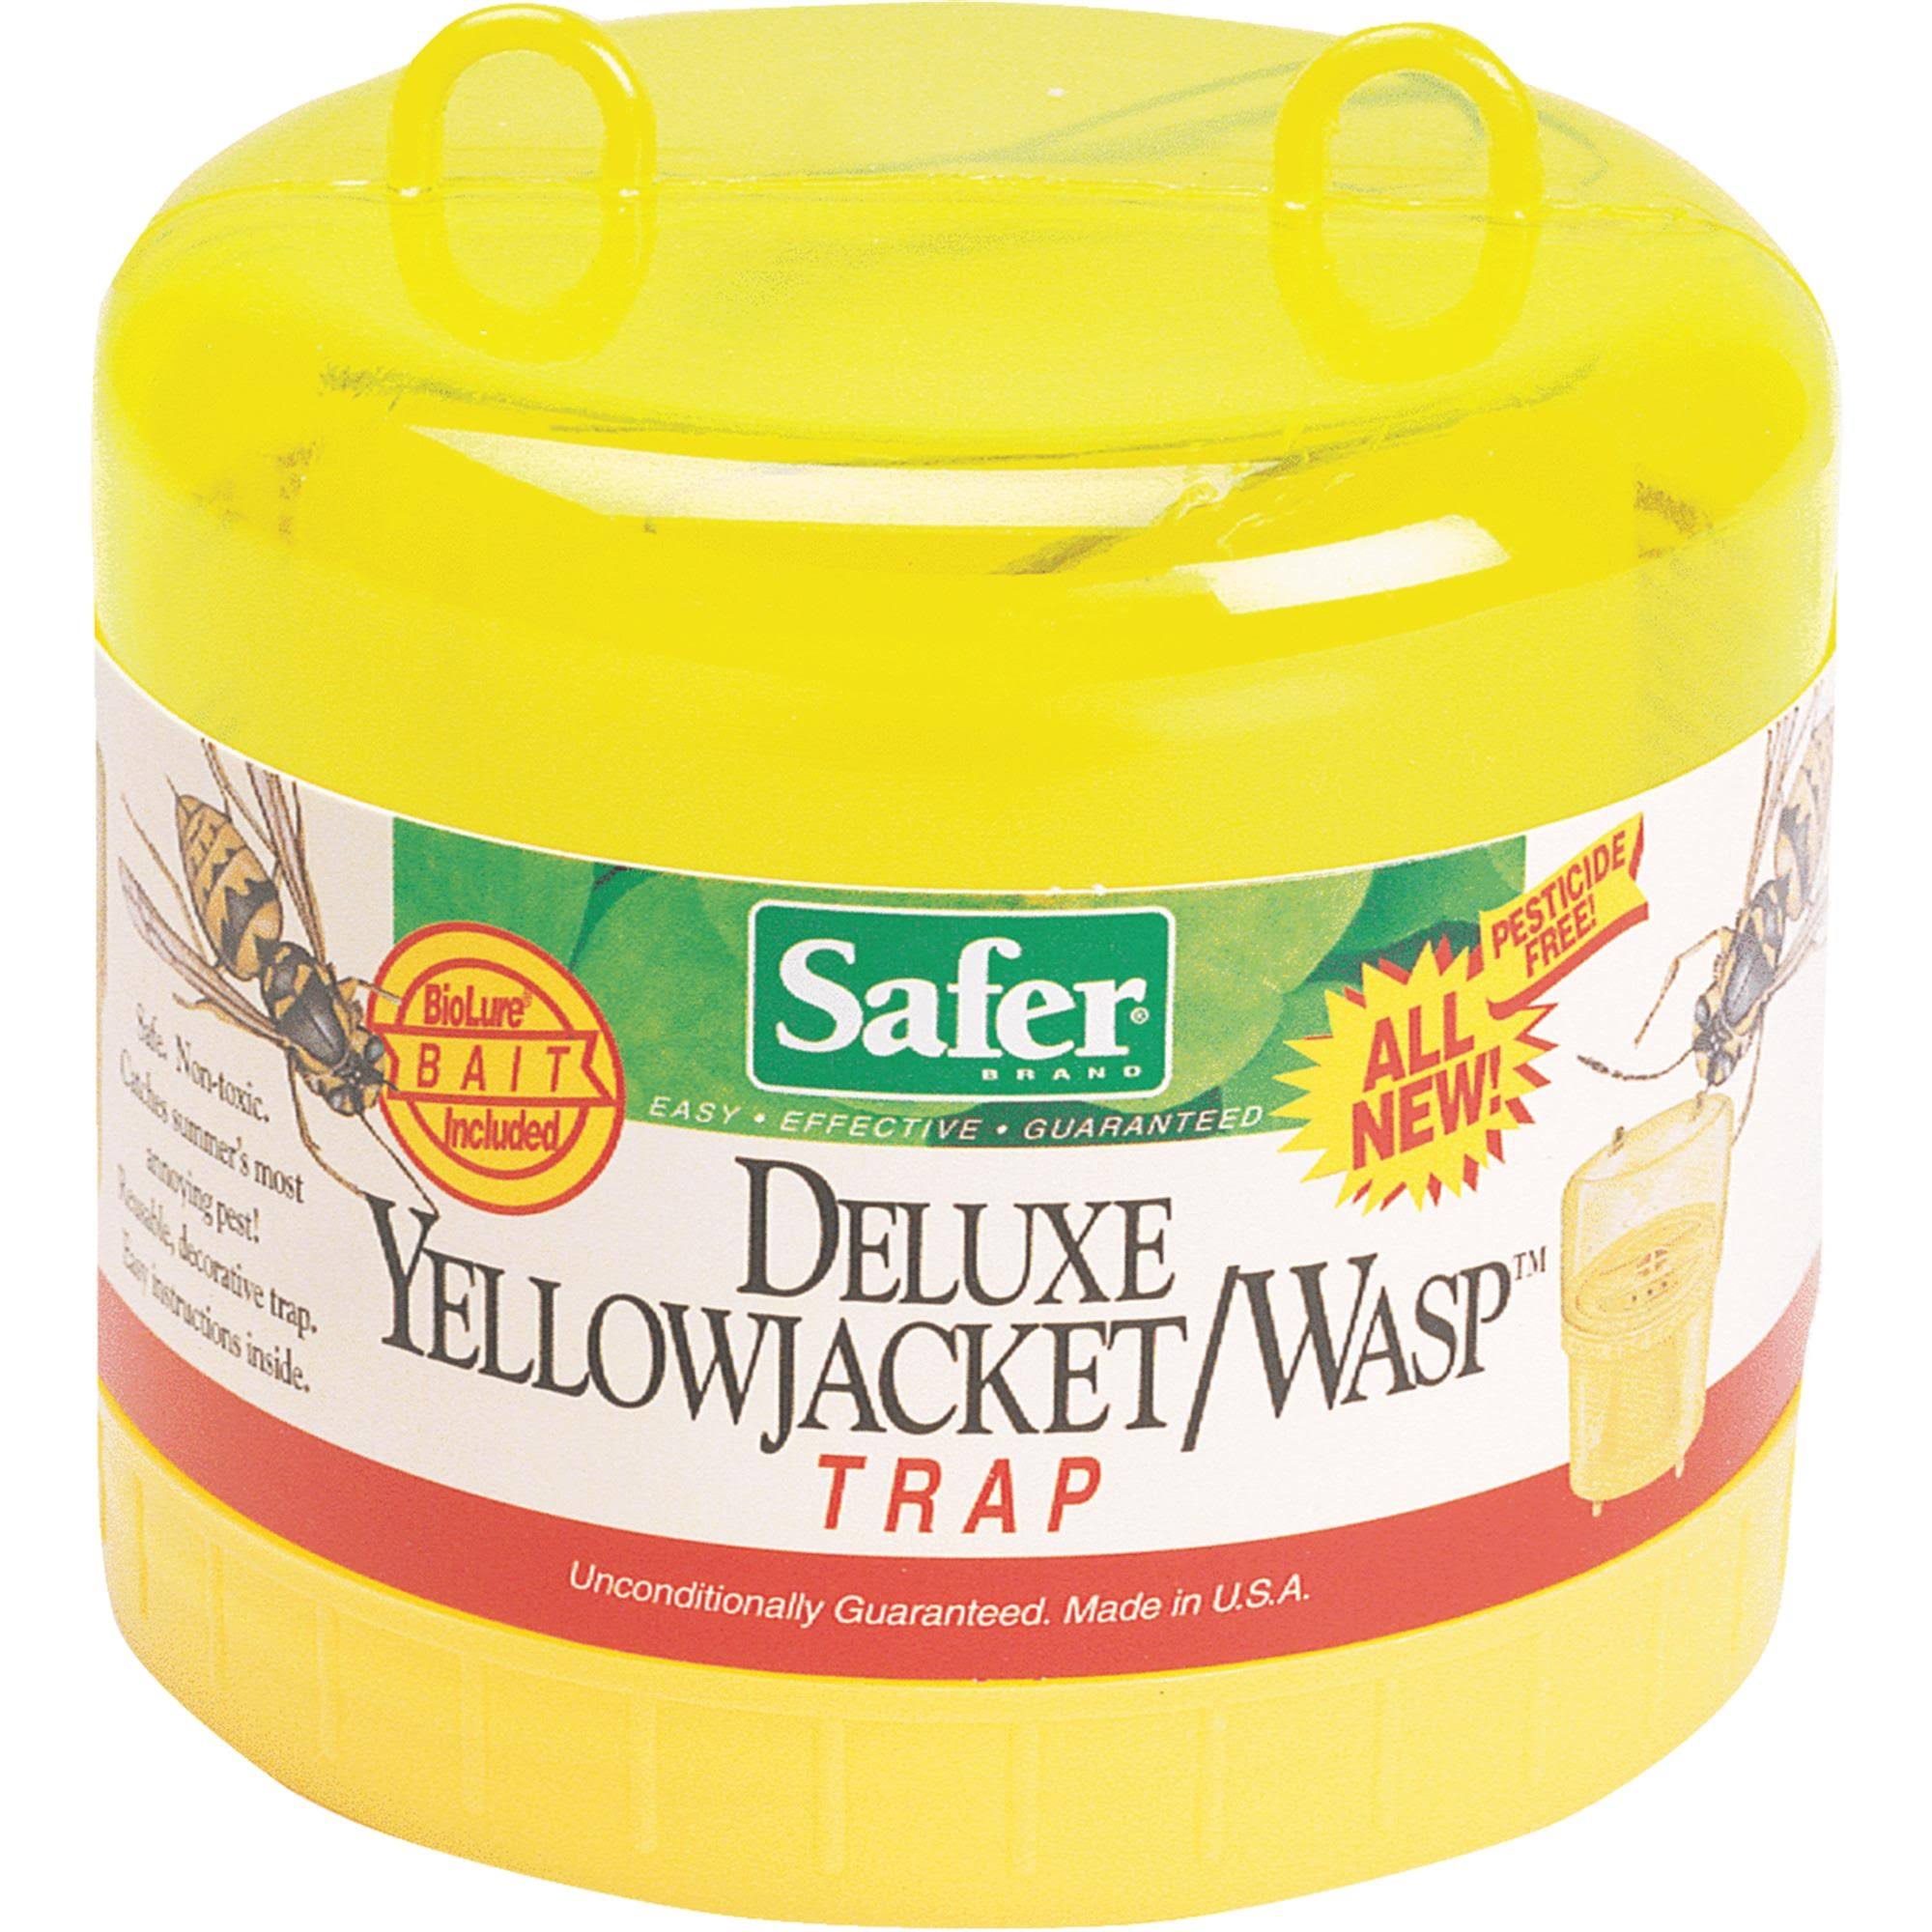 Safer Deluxe Yellow Jacket & Wasp Trap